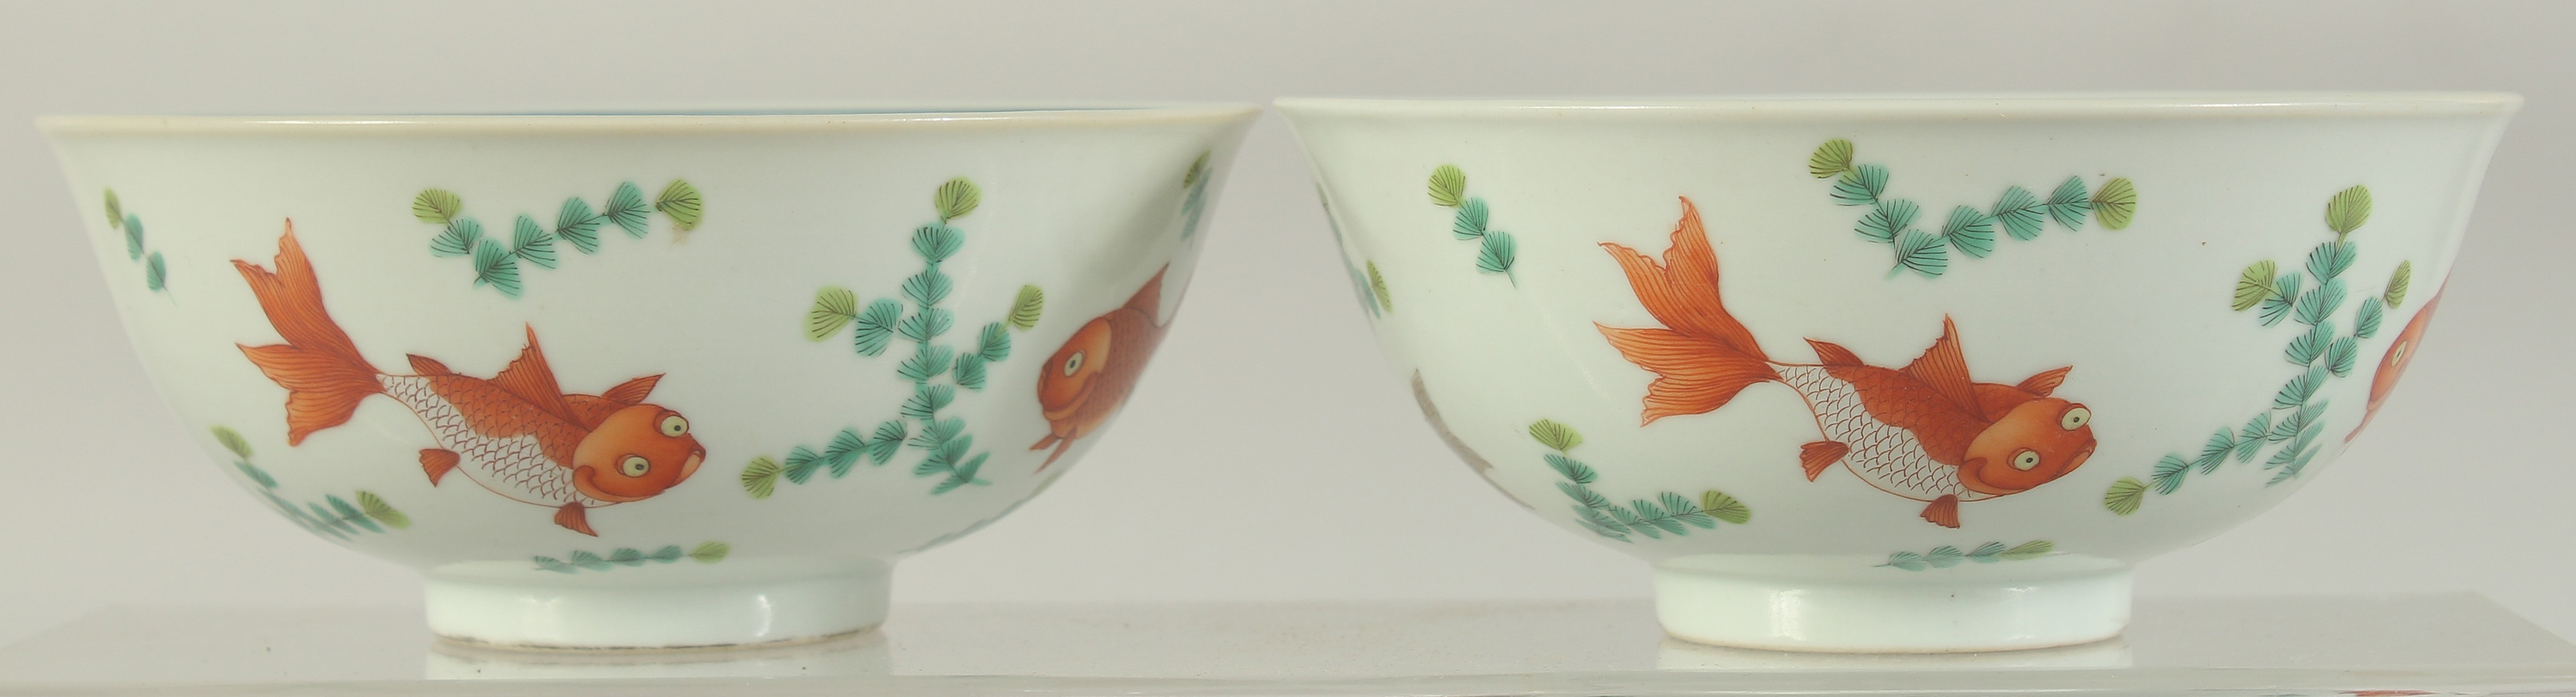 A PAIR OF CHINESE FAMILLE ROSE PORCELAIN BOWLS, the exterior painted with coral red fish, the - Image 5 of 9